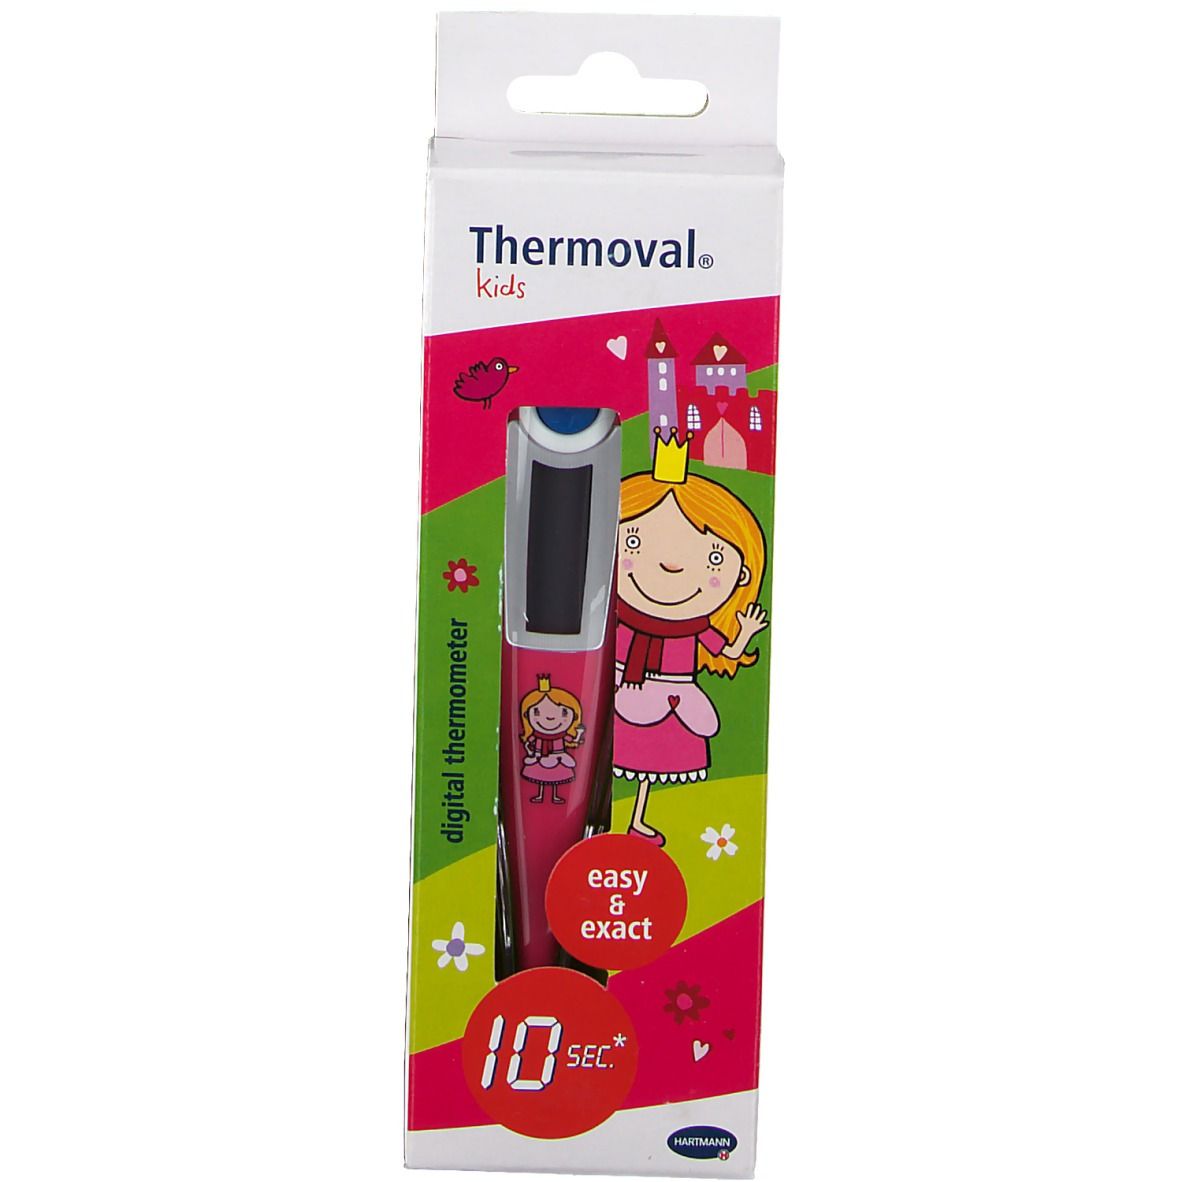 Thermoval® Kids Fieberthermometer